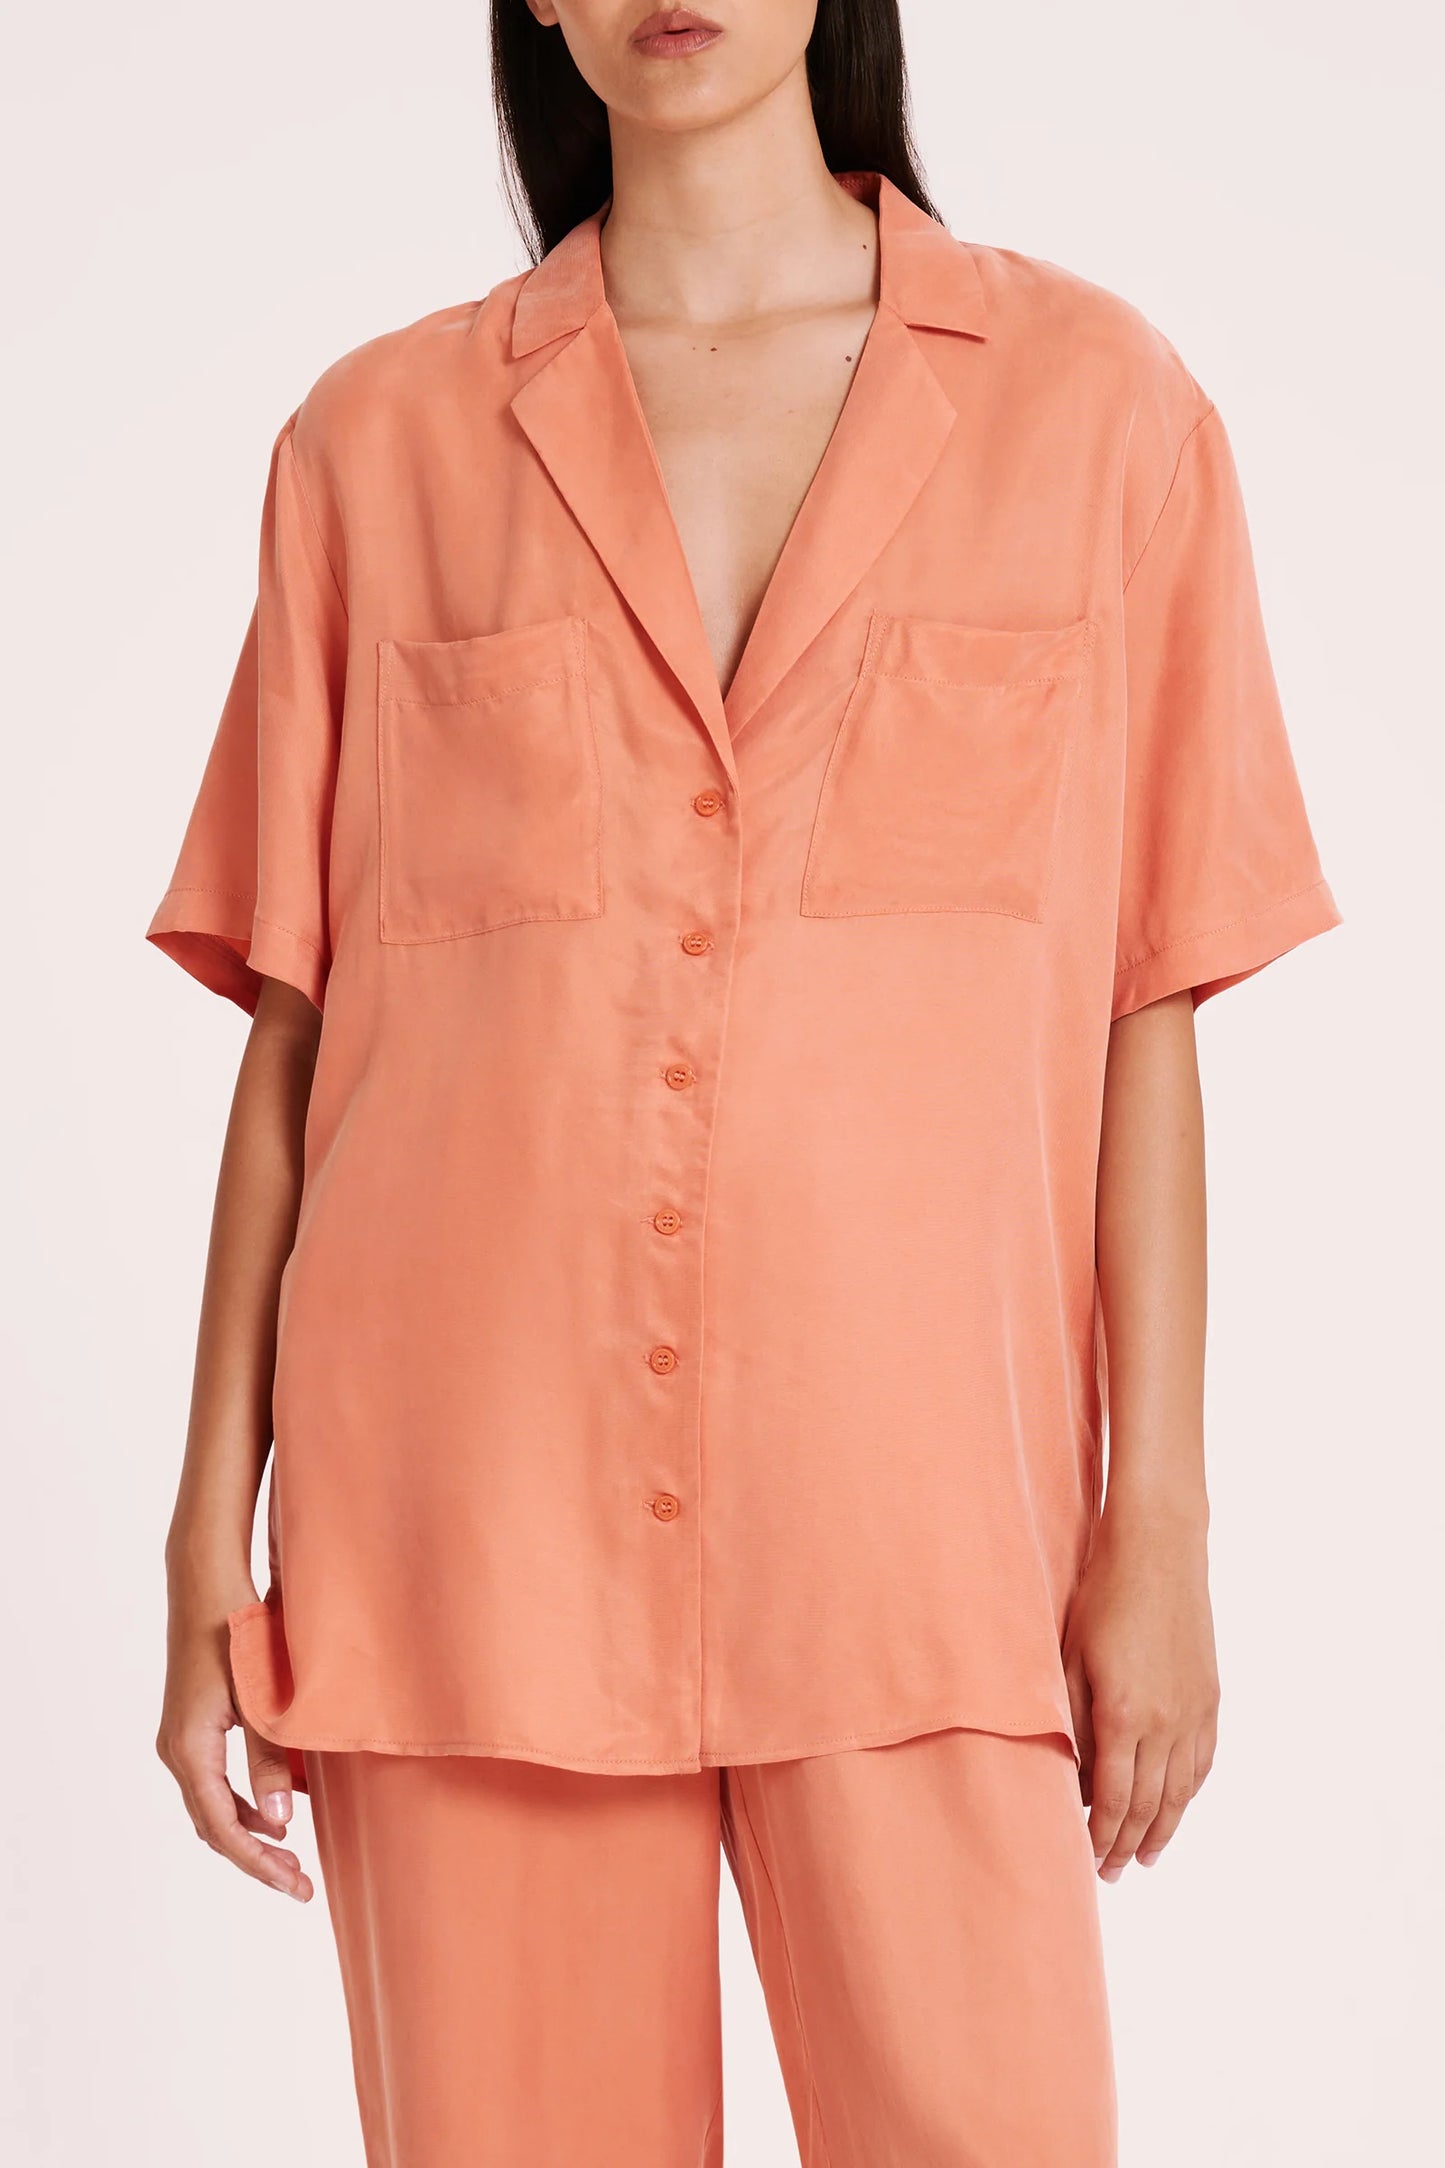 NUDE LUCY - Lucia  Cupro Shirt - WATERMELON